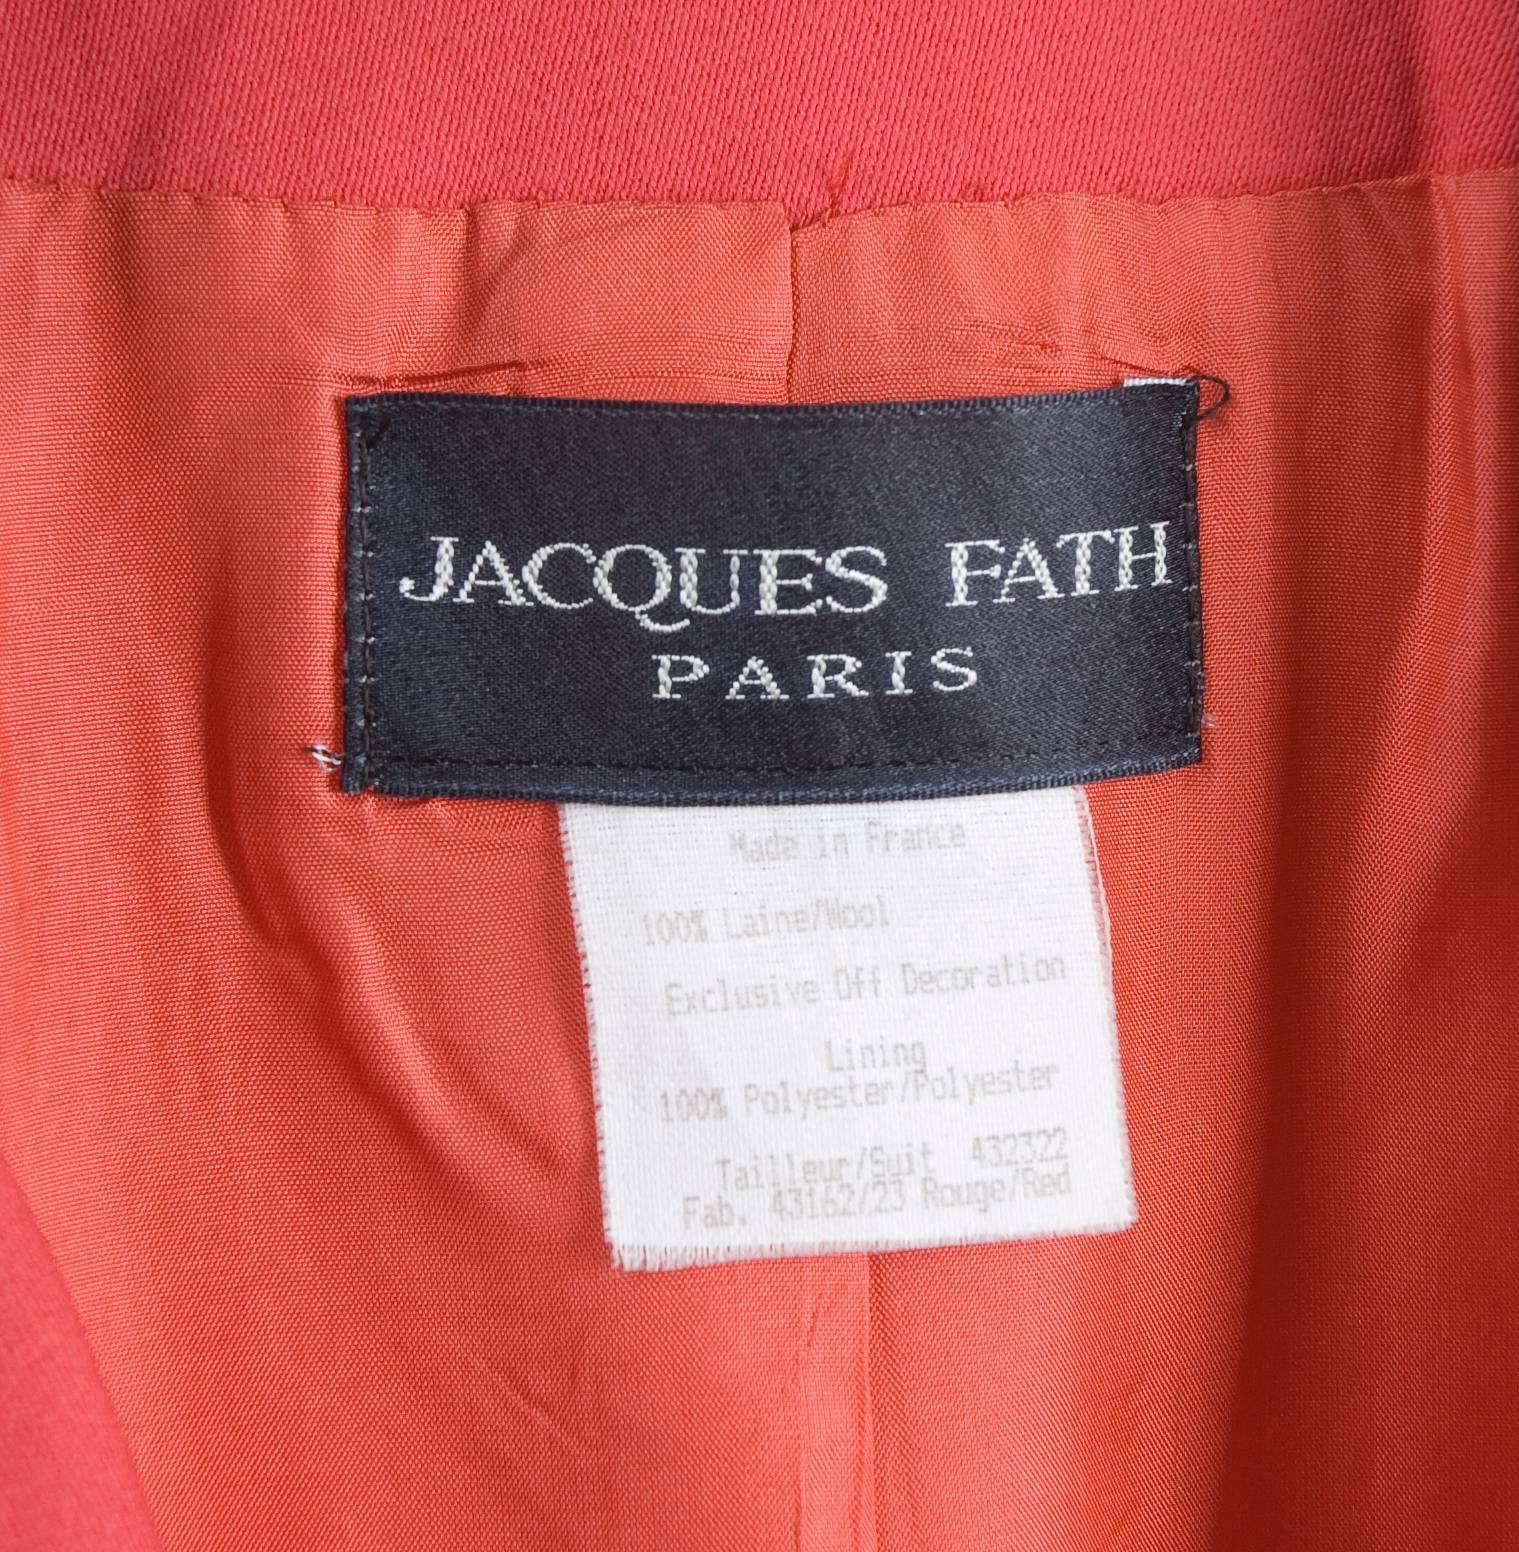 Jaques Fath Jacket in Lipstick Red and Black Velvet For Sale 5